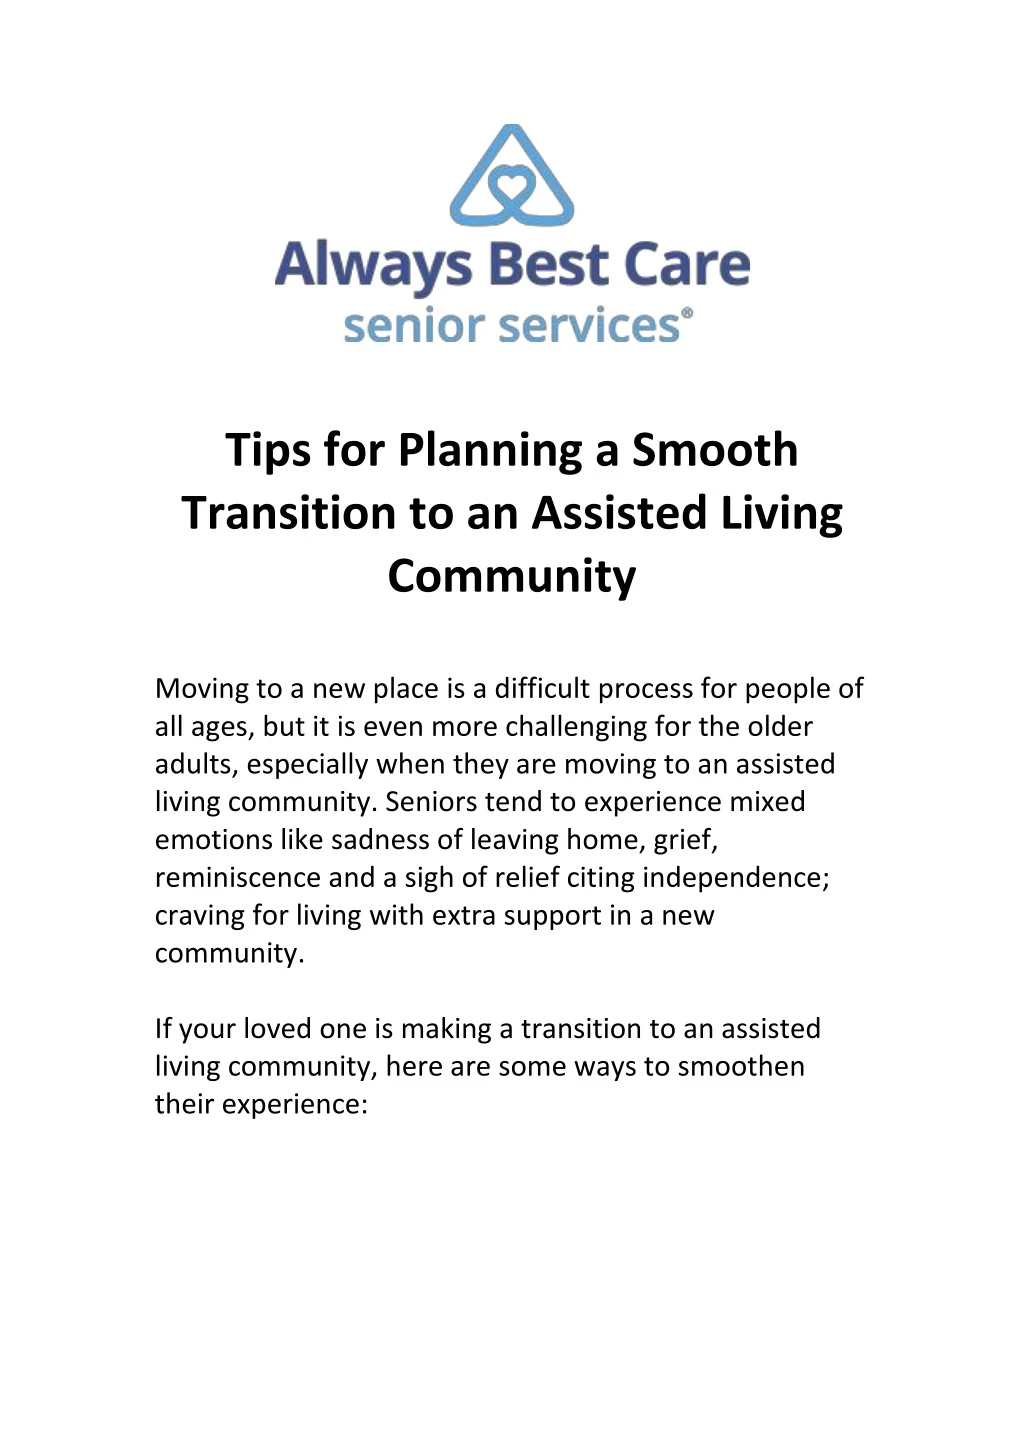 tips for planning a smooth transition